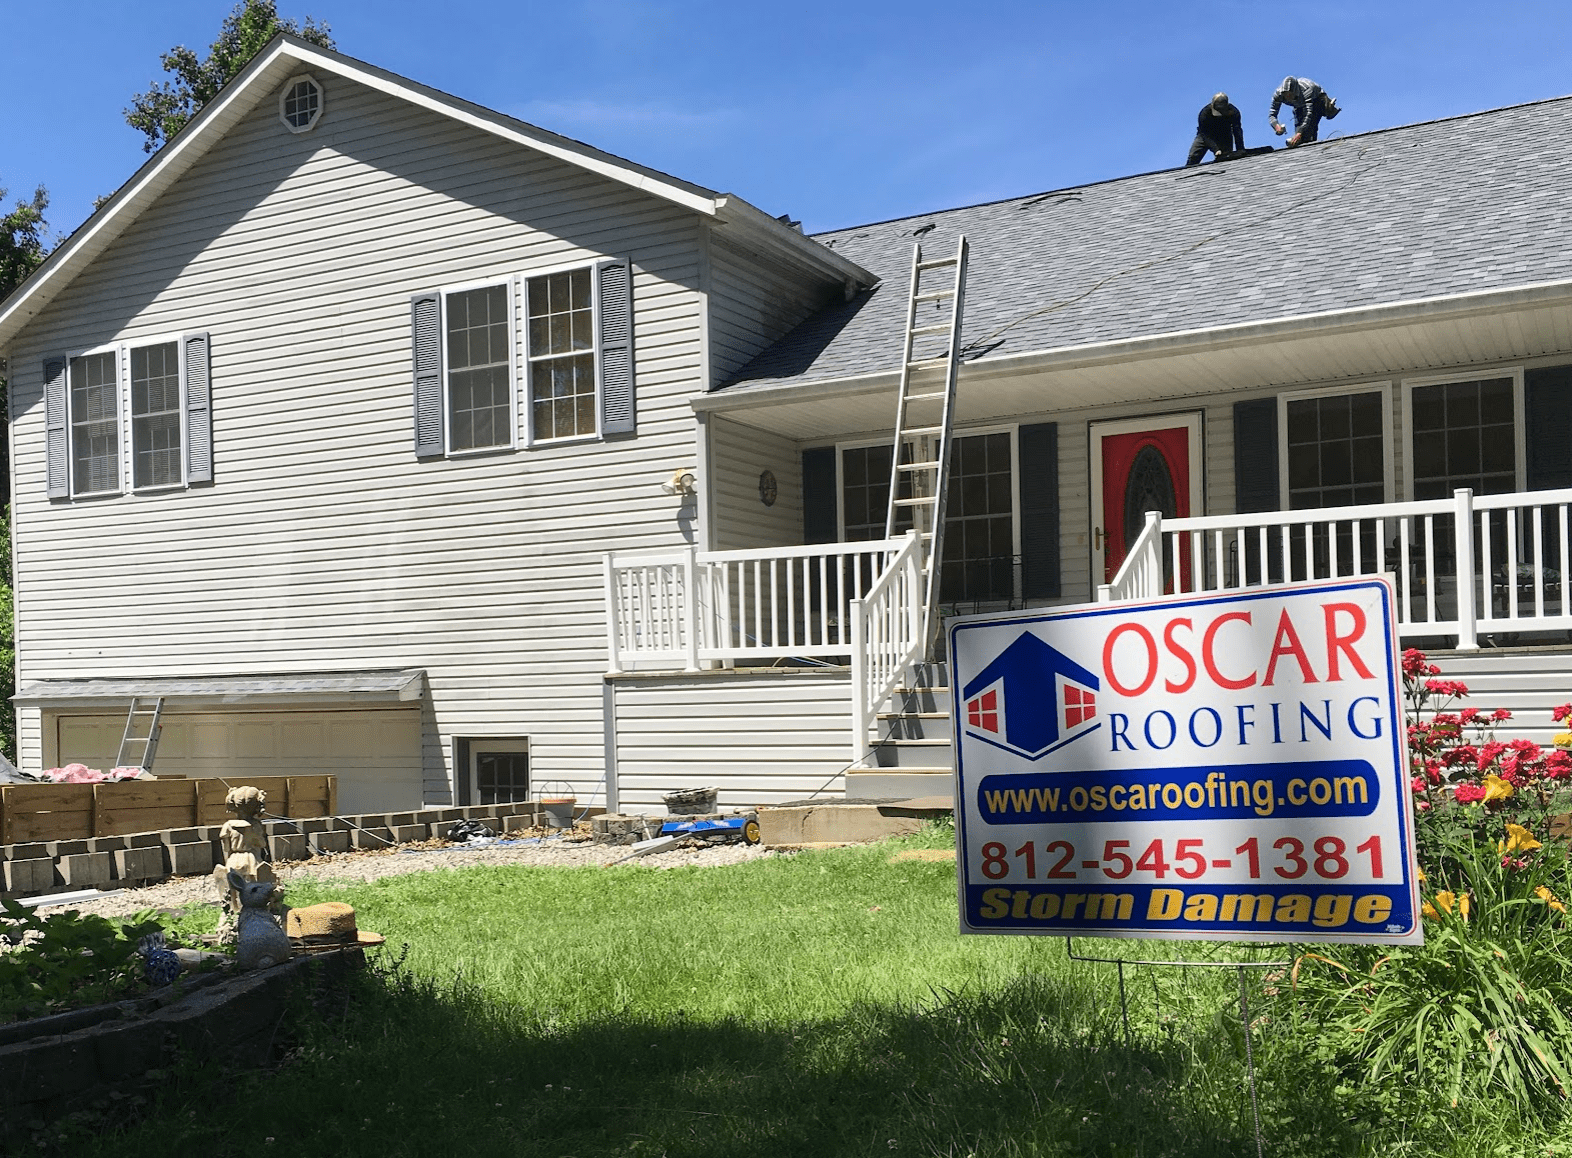 installation shingles in Indianapolis trudefinition Owens corning duration